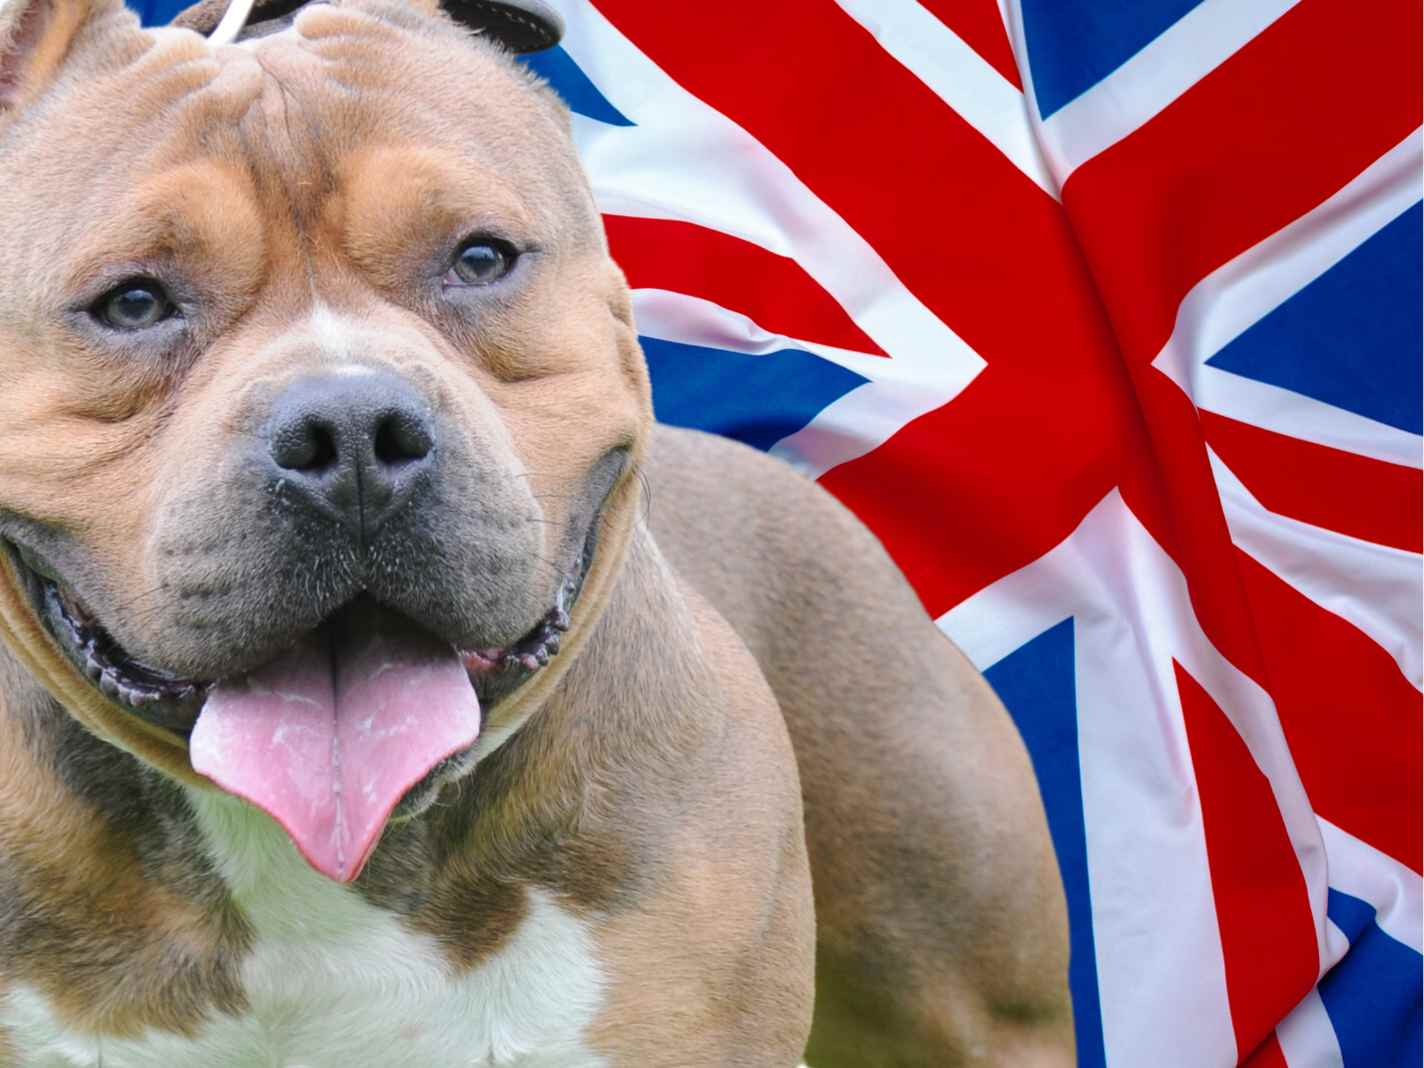 People Want Ban on American XL Bully Dogs in the Wake of the Birmingham Attack